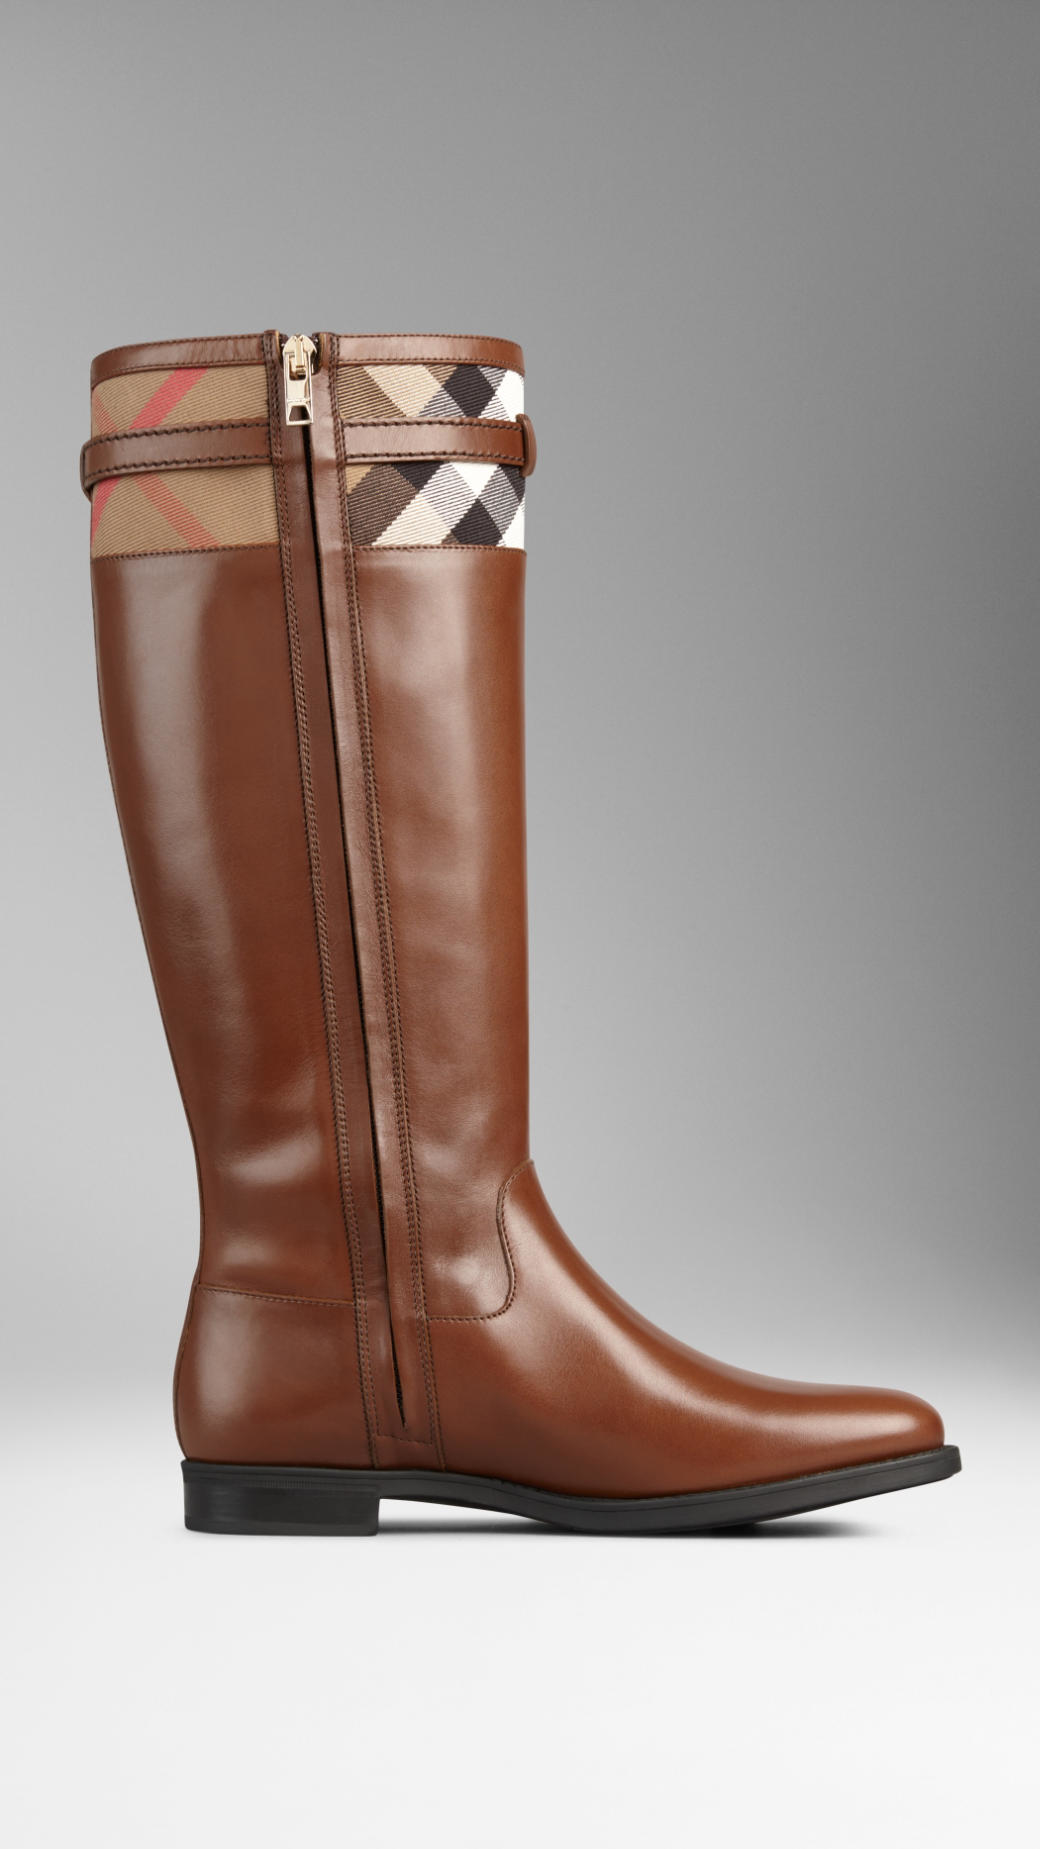 Burberry Leather House Check Detail Riding Boots in Dark Tan (Brown) - Lyst